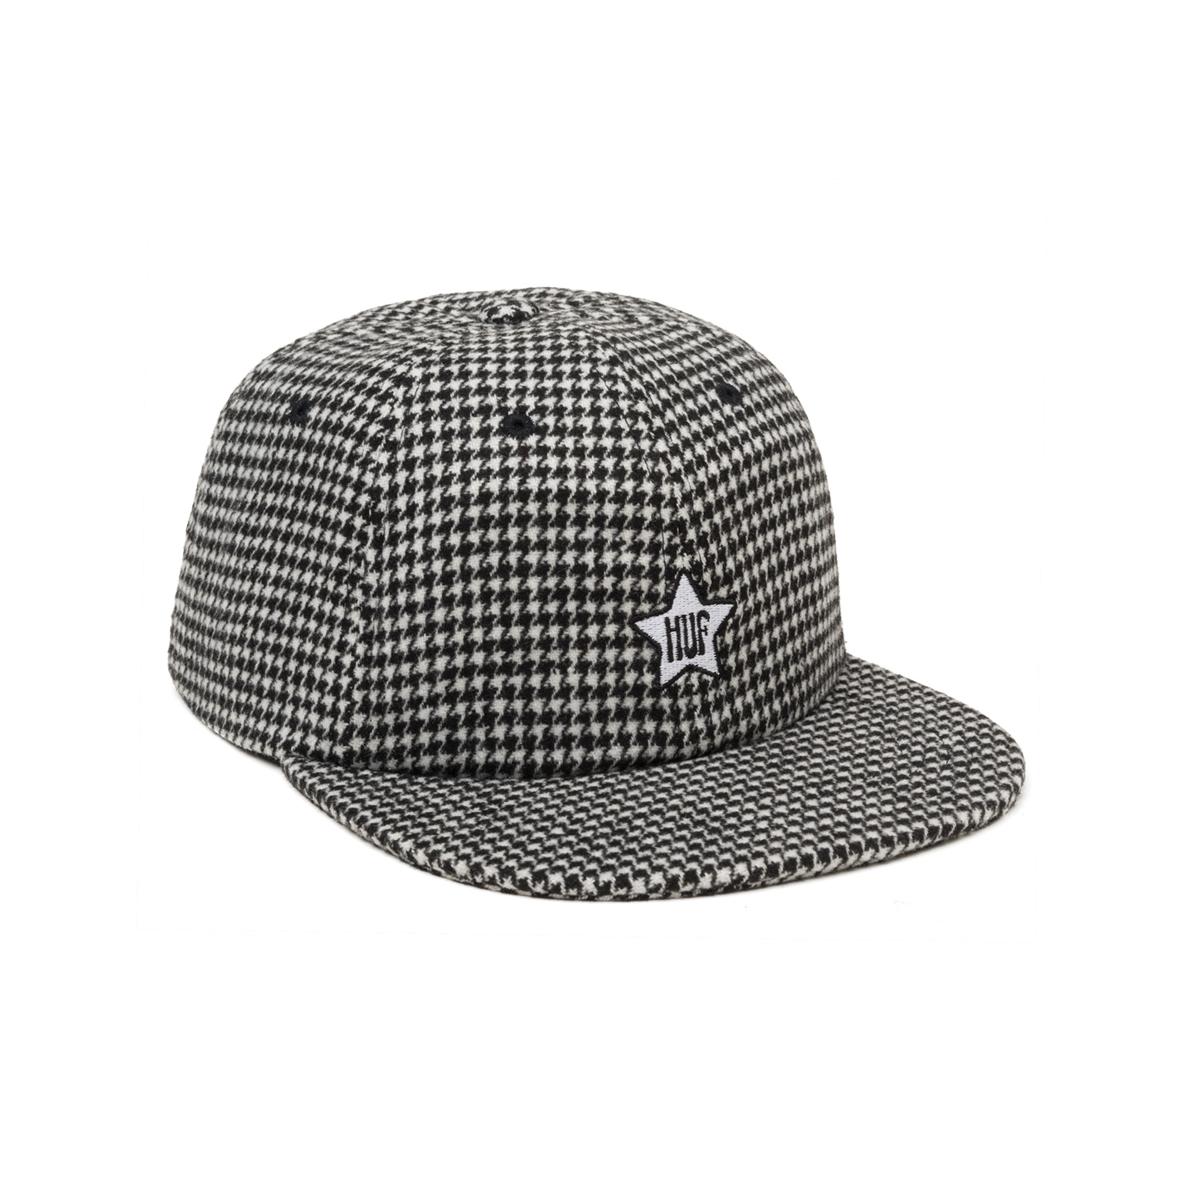 Casquette Huf One Star Houndstooth 6 Panel Black